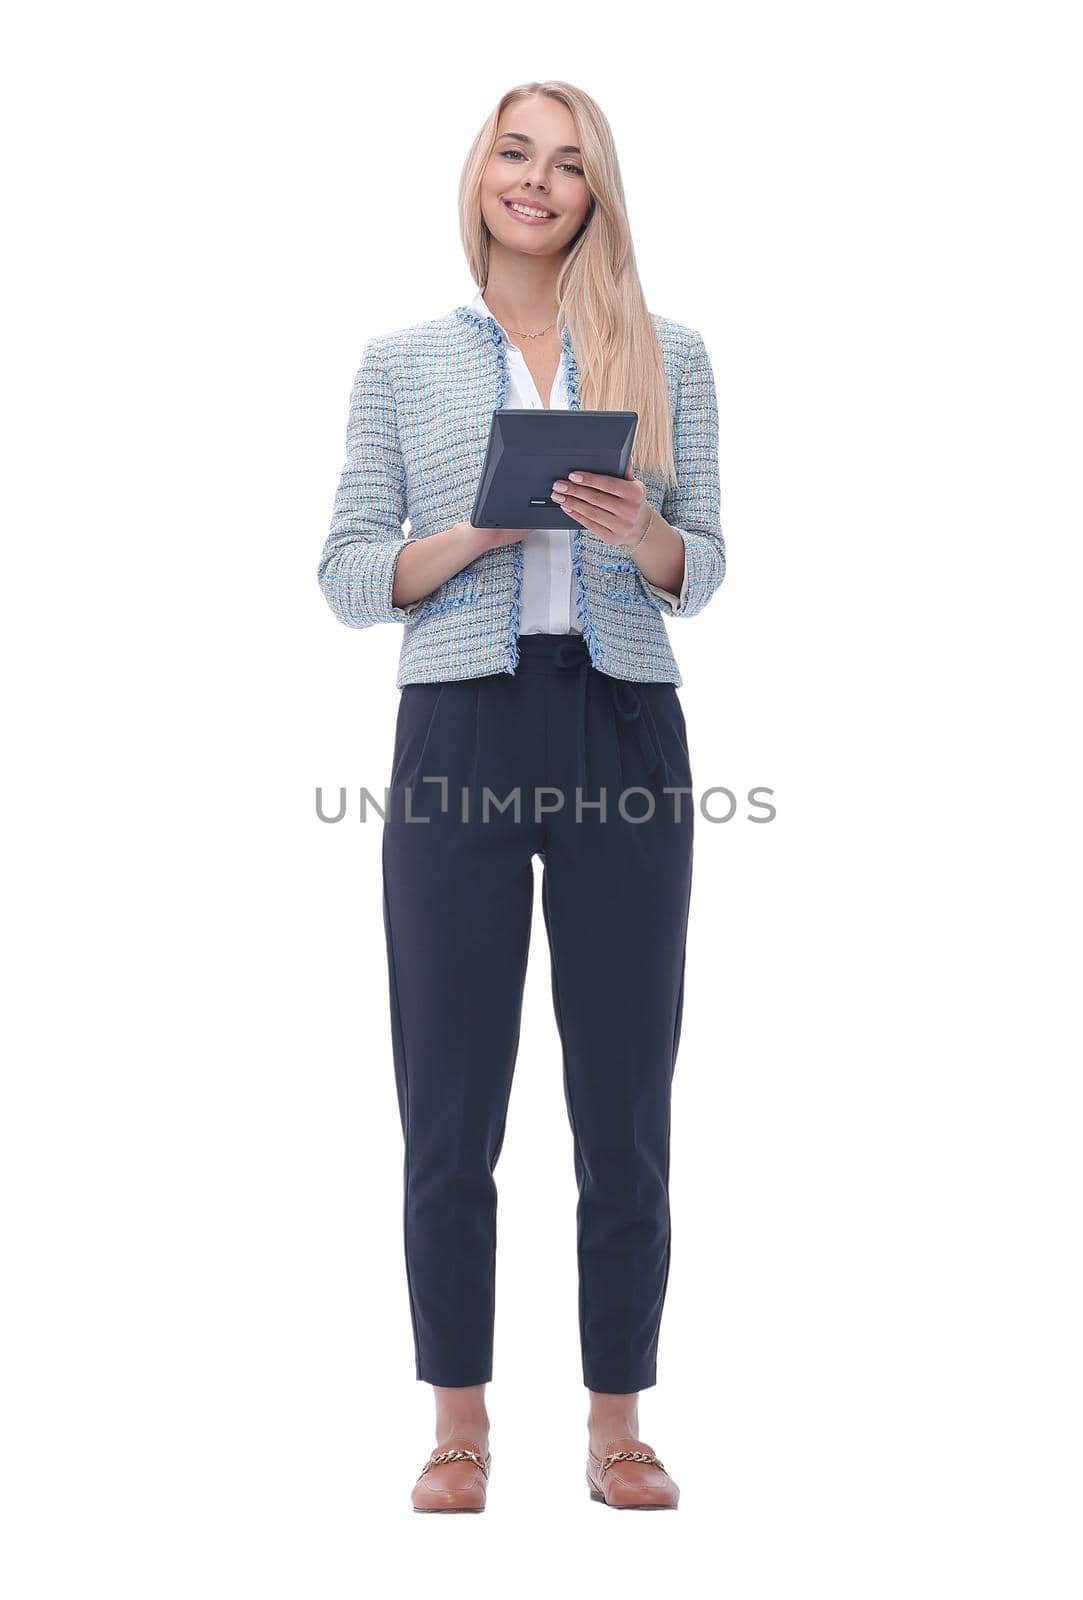 in full growth. smiling young business woman with calculator. isolated on white background